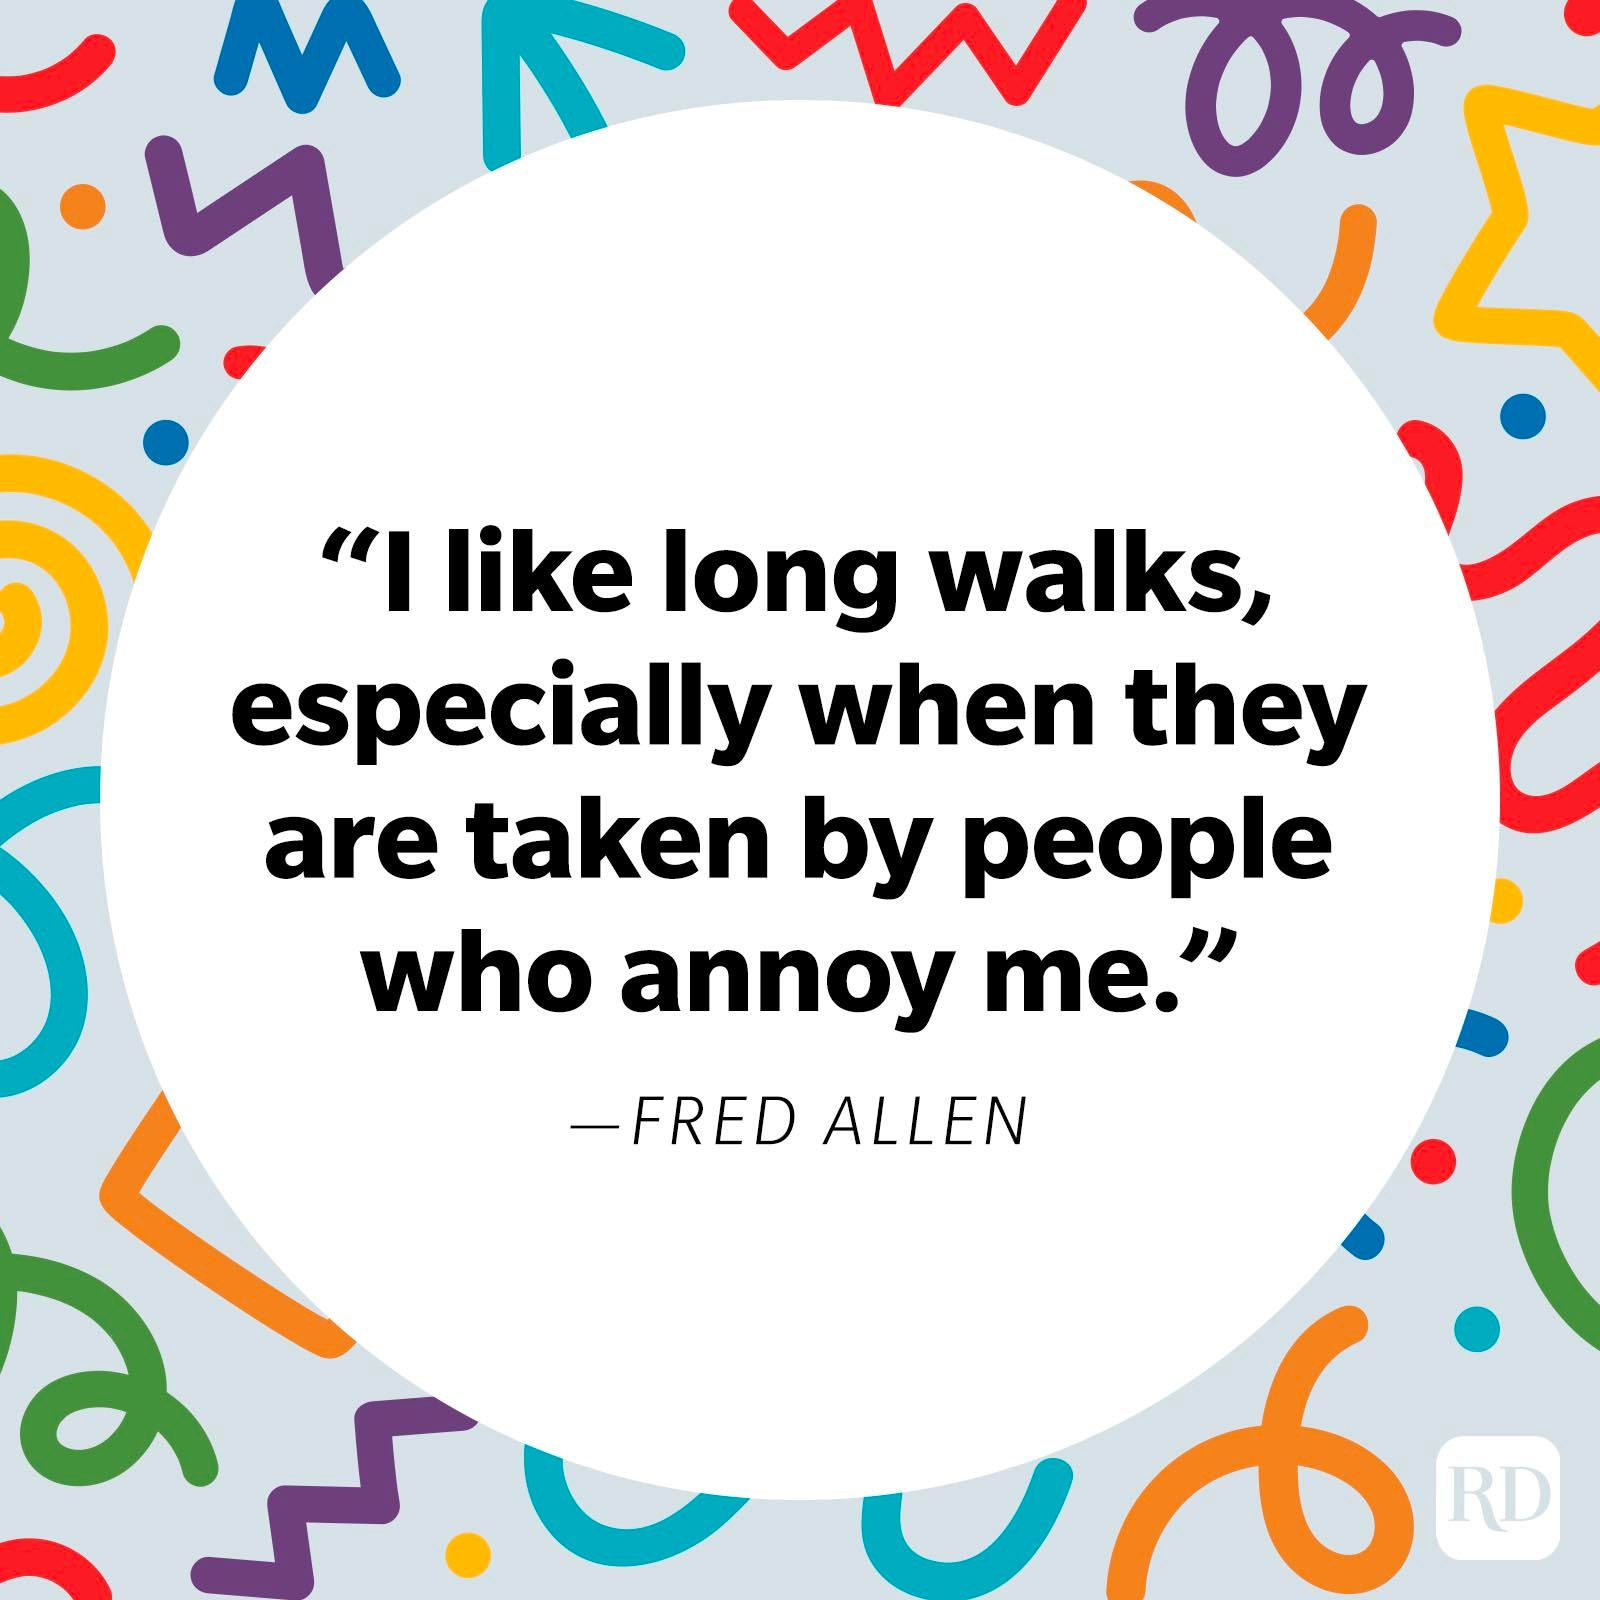 Quotes for Dealing with Annoying People